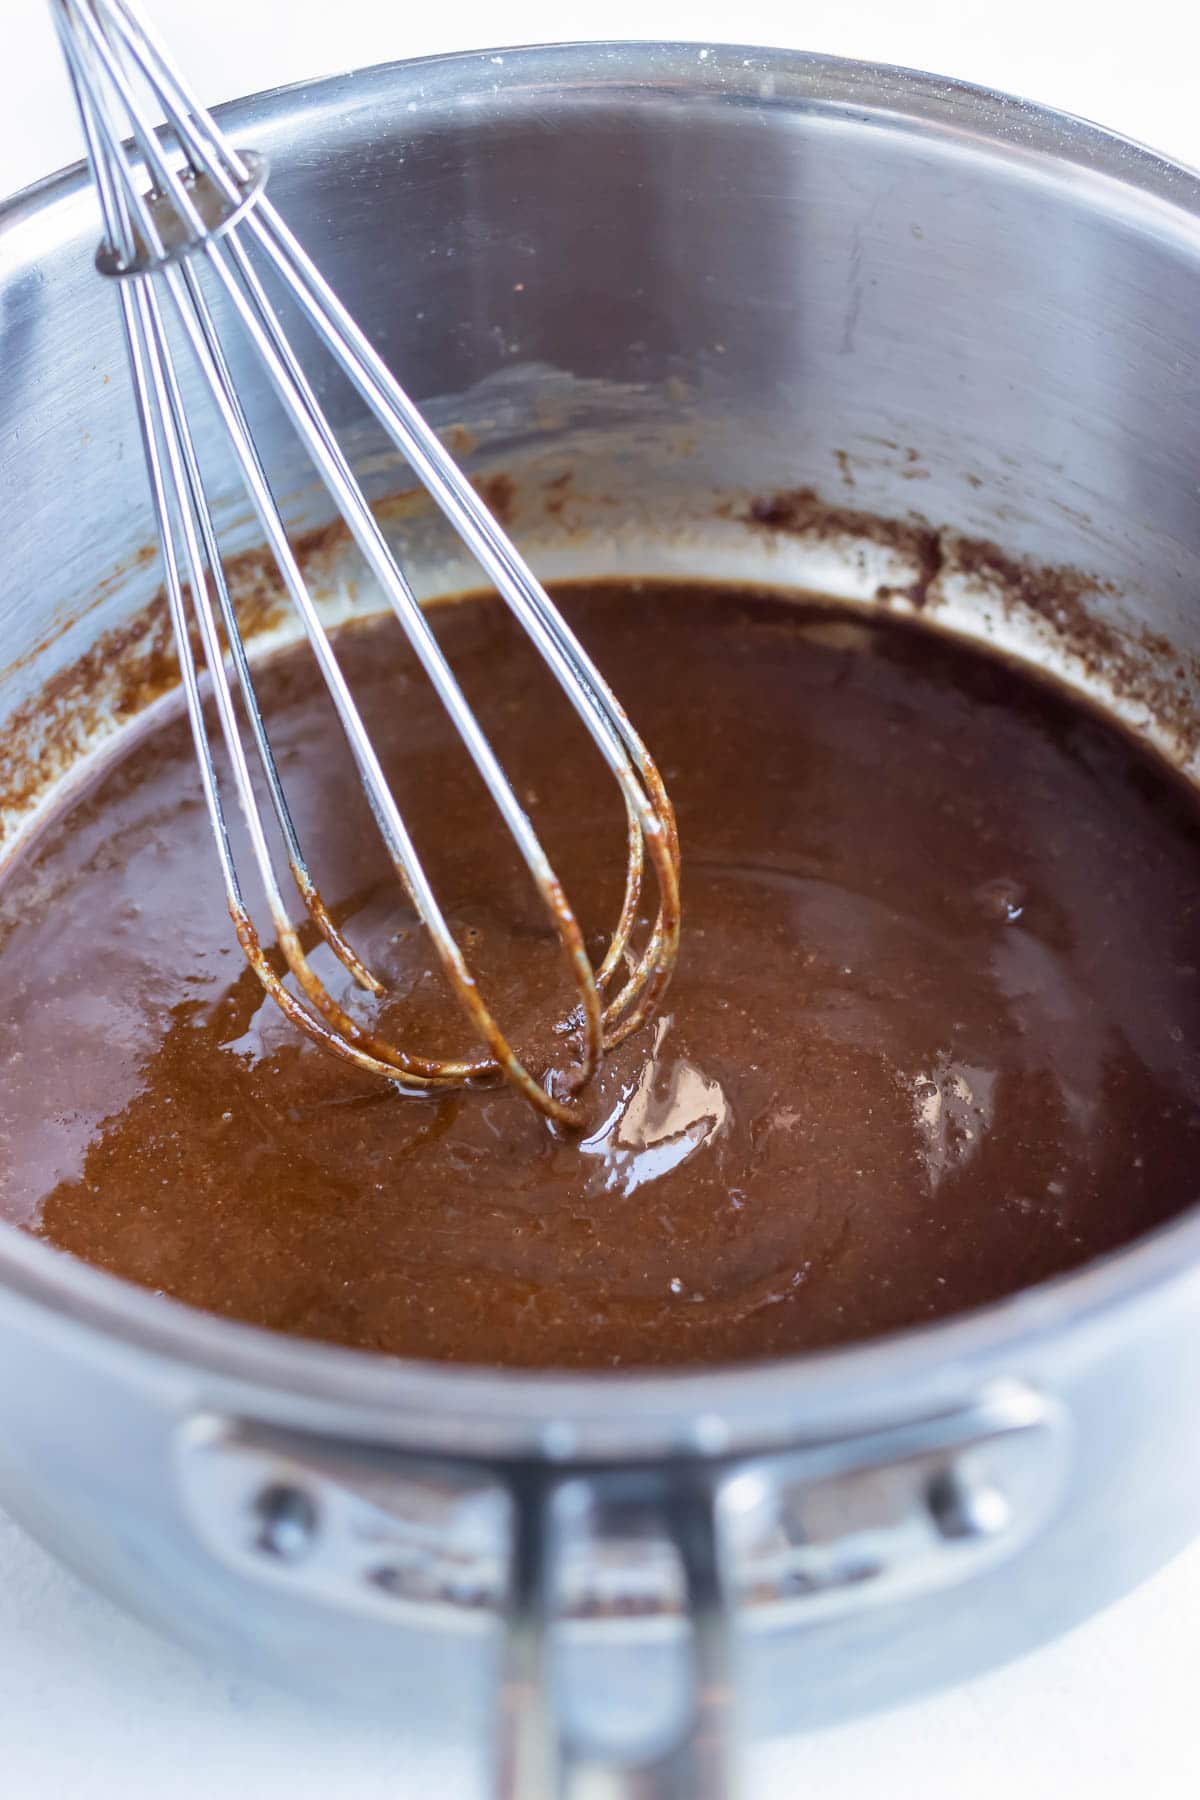 A whisk is used to stir a dark brown roux.